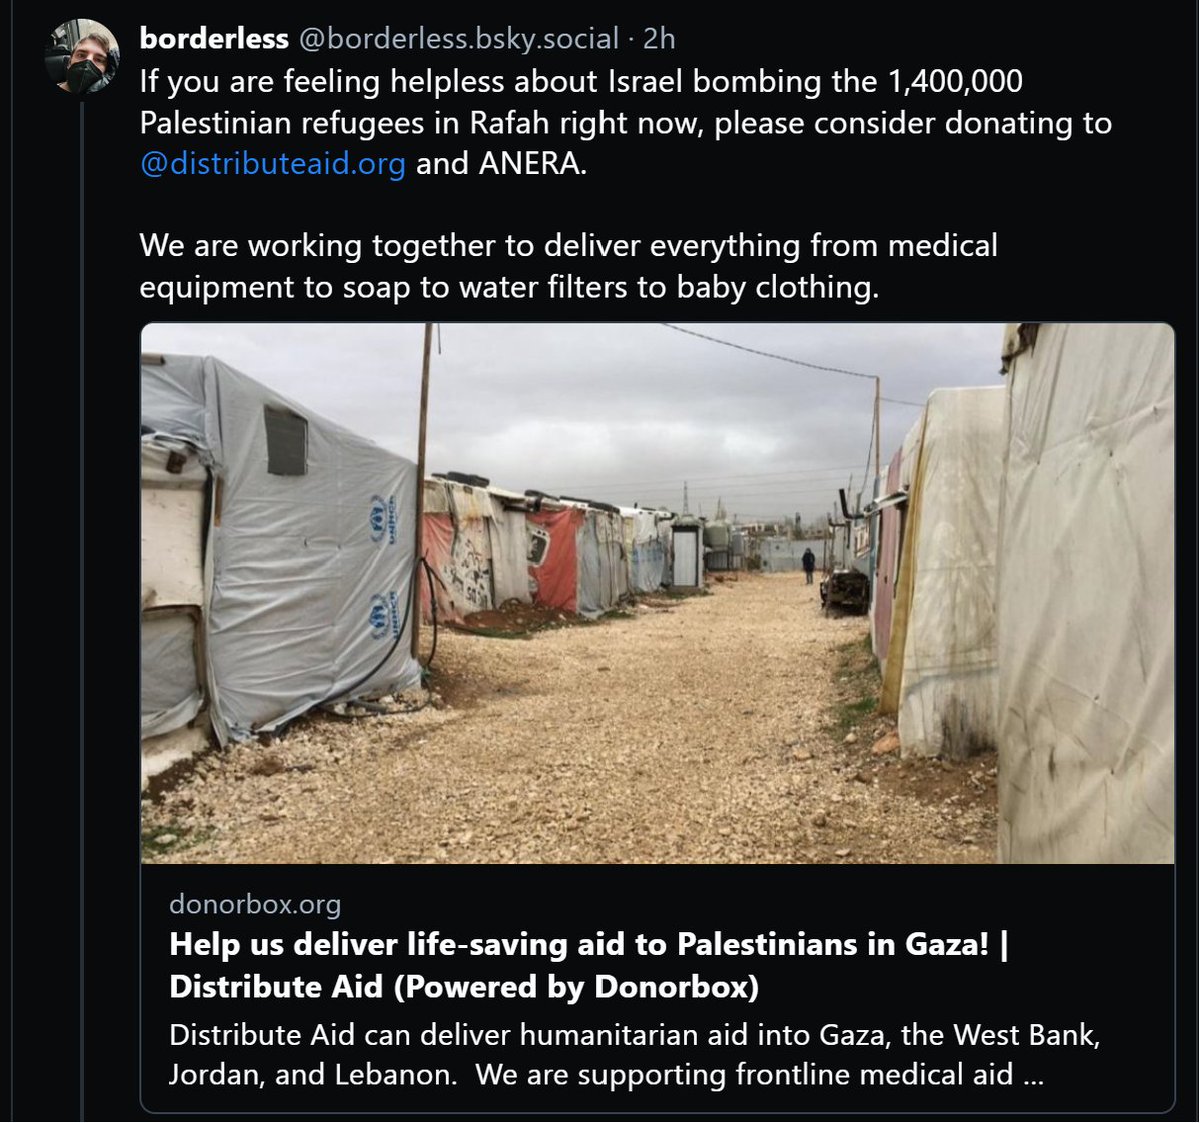 via @ / borderless on the other app. If you would like to help Palestinians, pls consider donating to @DistributeAid and ANERA. They are working to deliver supplies like medical equipment, soap, clean water, clothing, etc. Link here: donorbox.org/help-distribut…